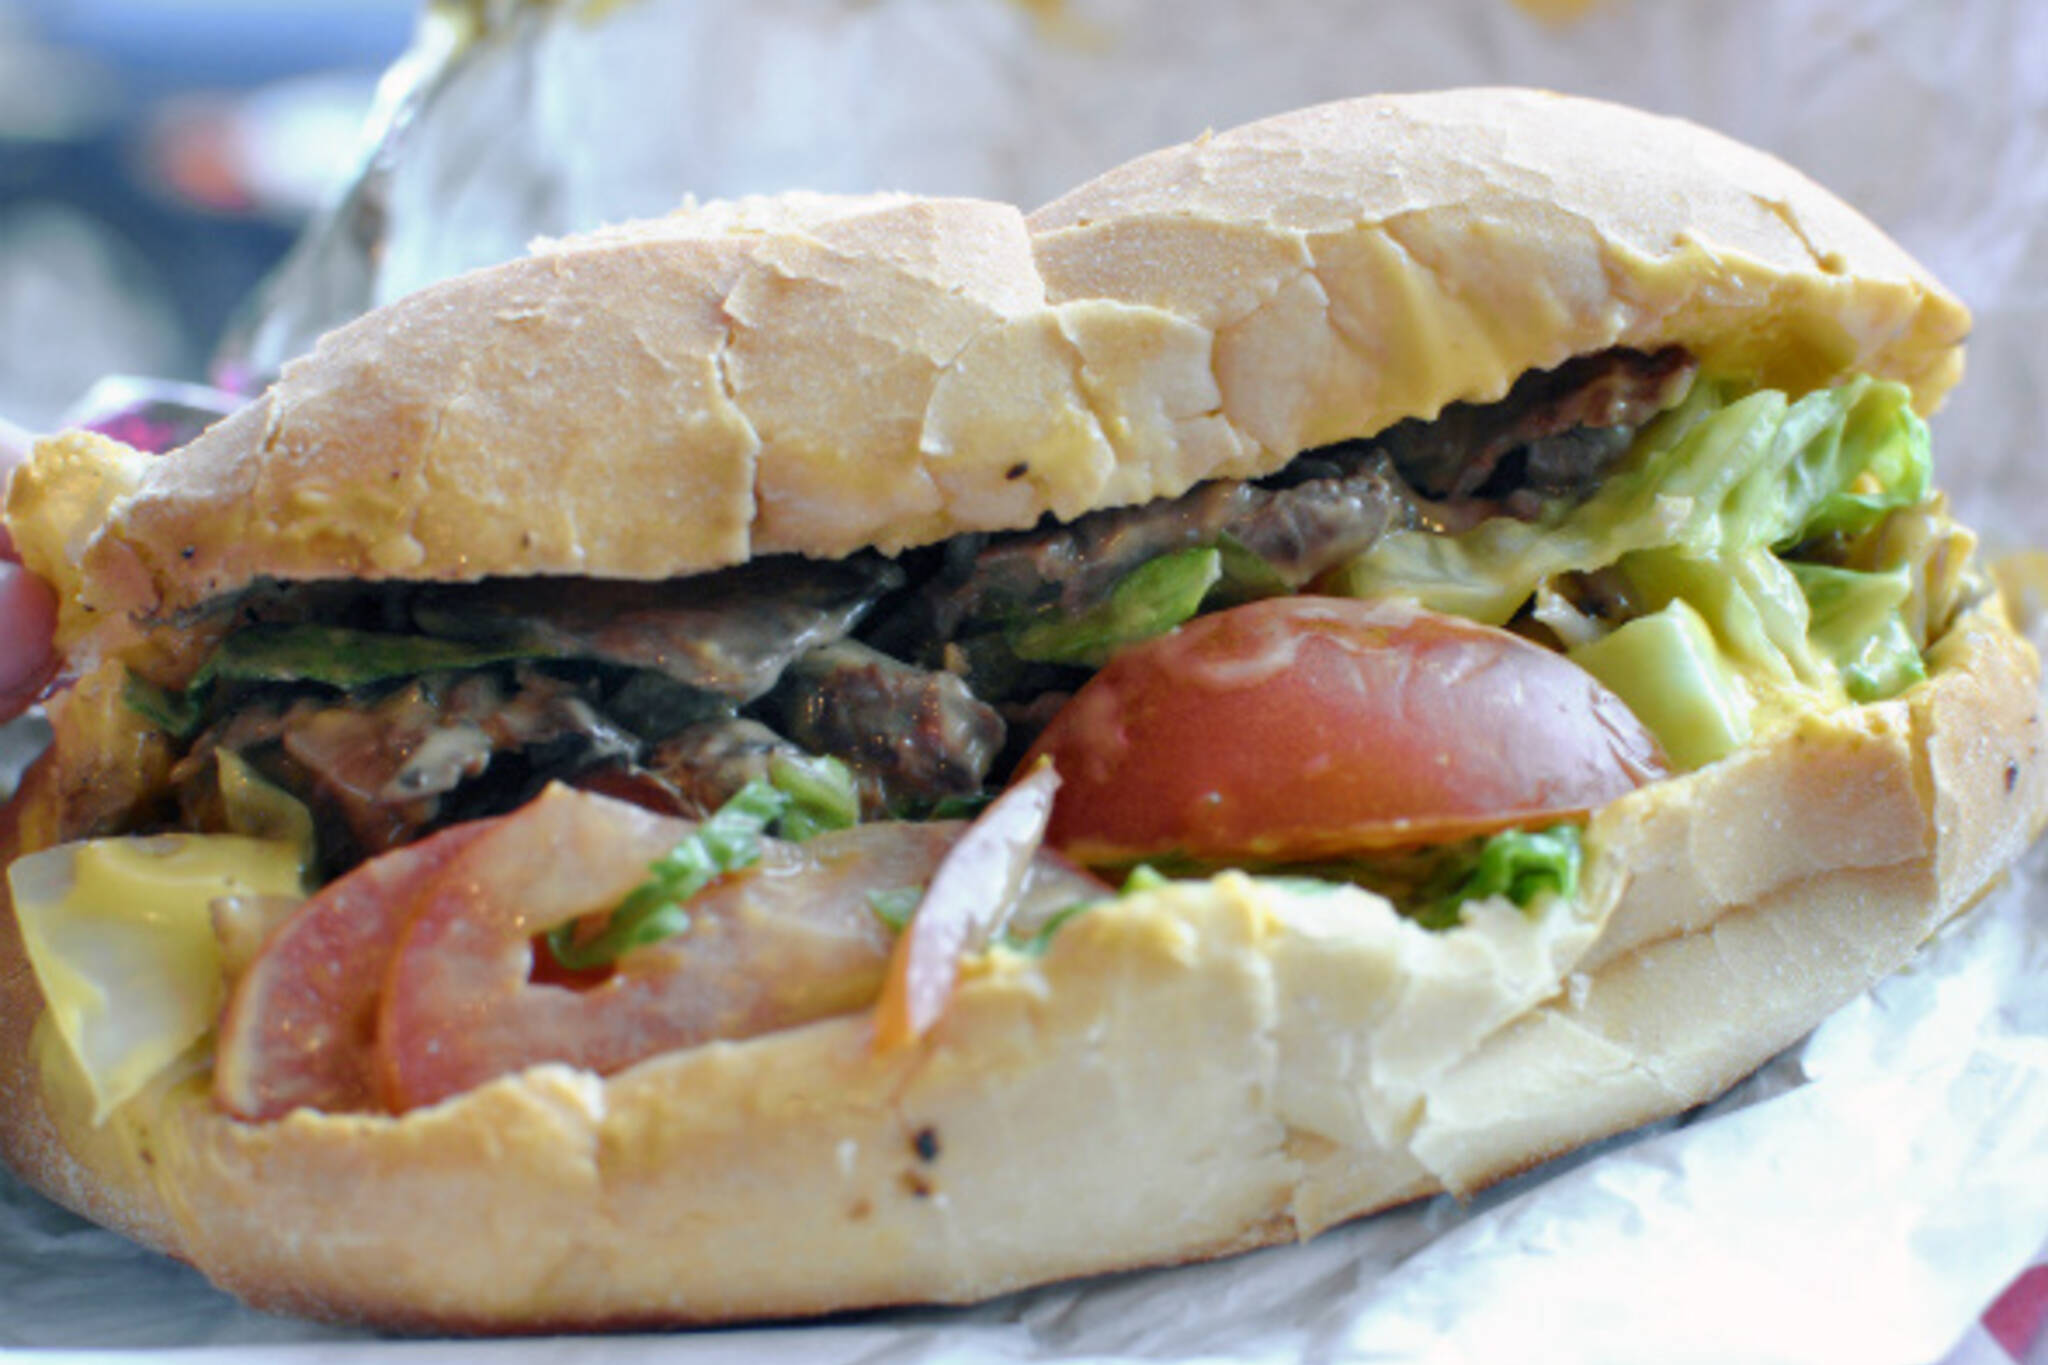 New Philly cheesesteak joint opens near Ryerson